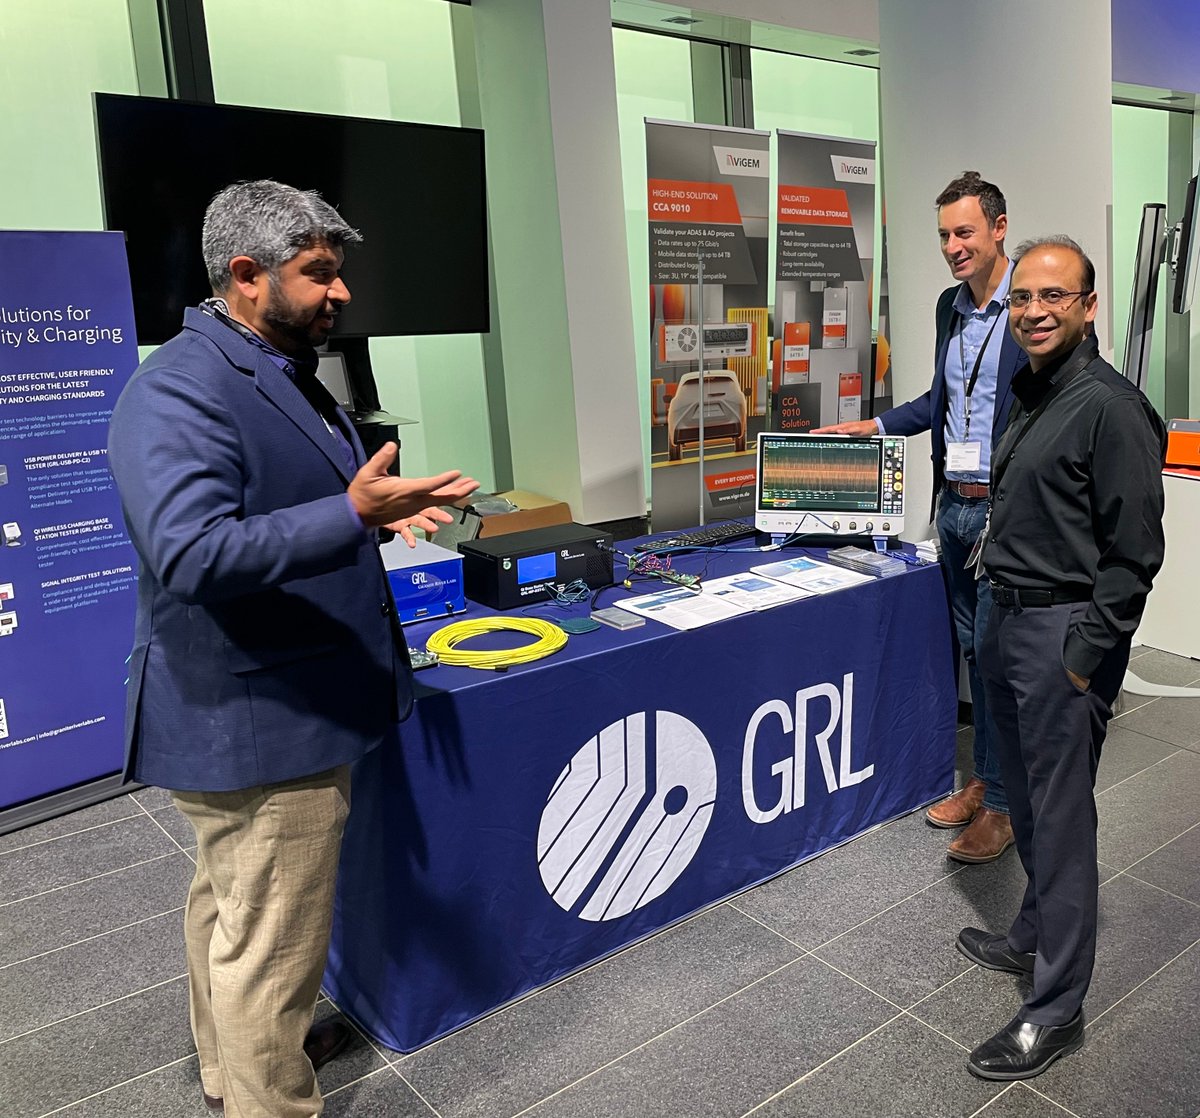 Today! Join us at the IEEE Automotive Ethernet Conference. Stop by our stand  in the conference hall during the networking breaks and speak to Vamshi Kandalla, GRL Chief Strategy Officer to discuss high-speed connectivity and charging. 
#EIPATD #AutomotiveEthernet